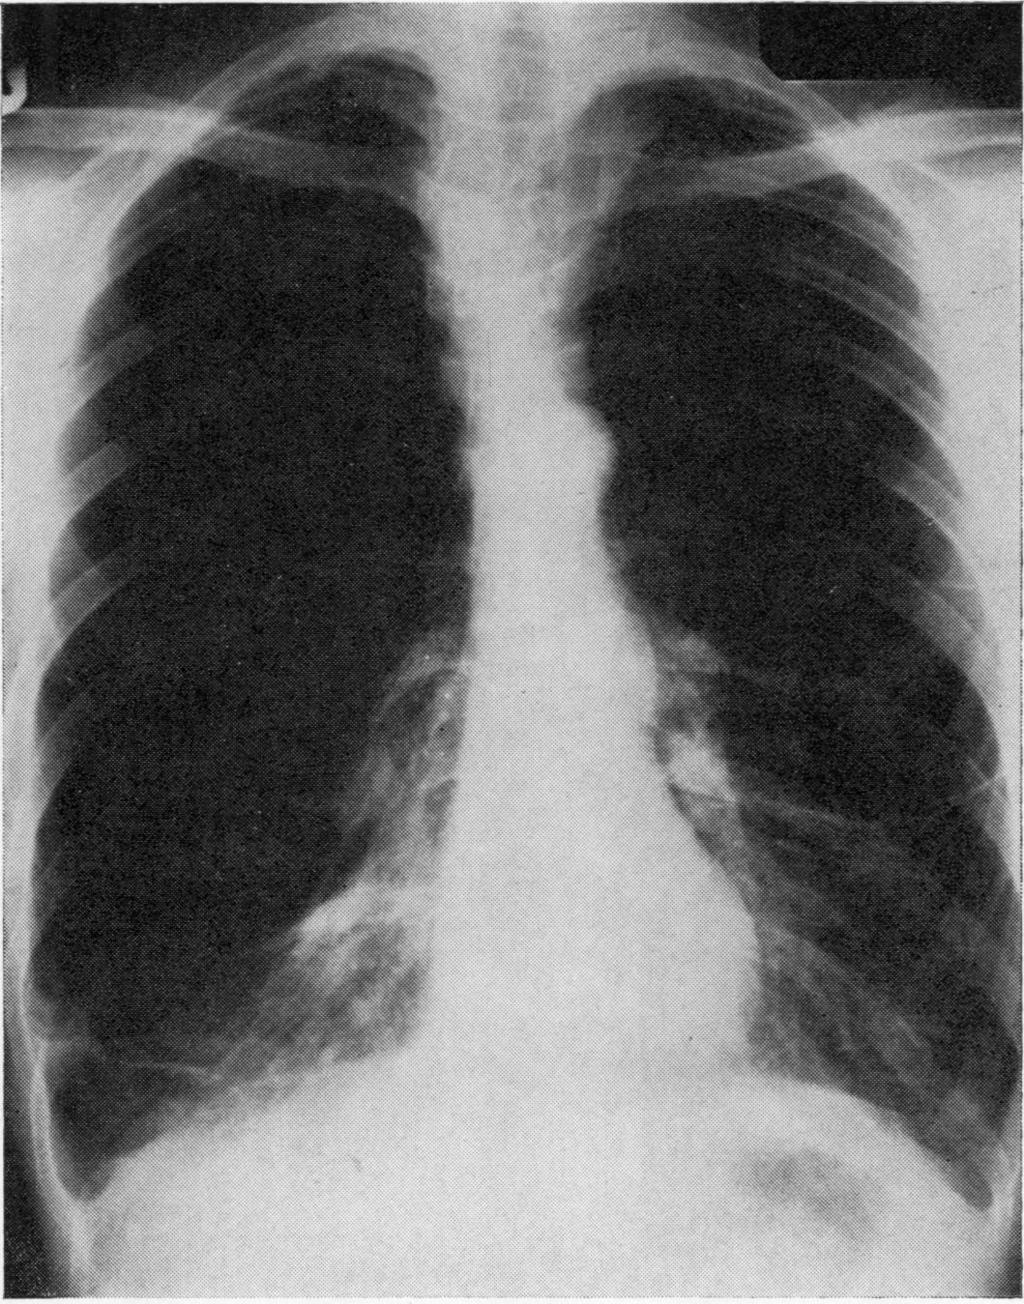 887 tuberculosis had postoperative complications (table 1). In one patient an air leak persisted for four months and in another a residual airspace required tube thoracostomy.